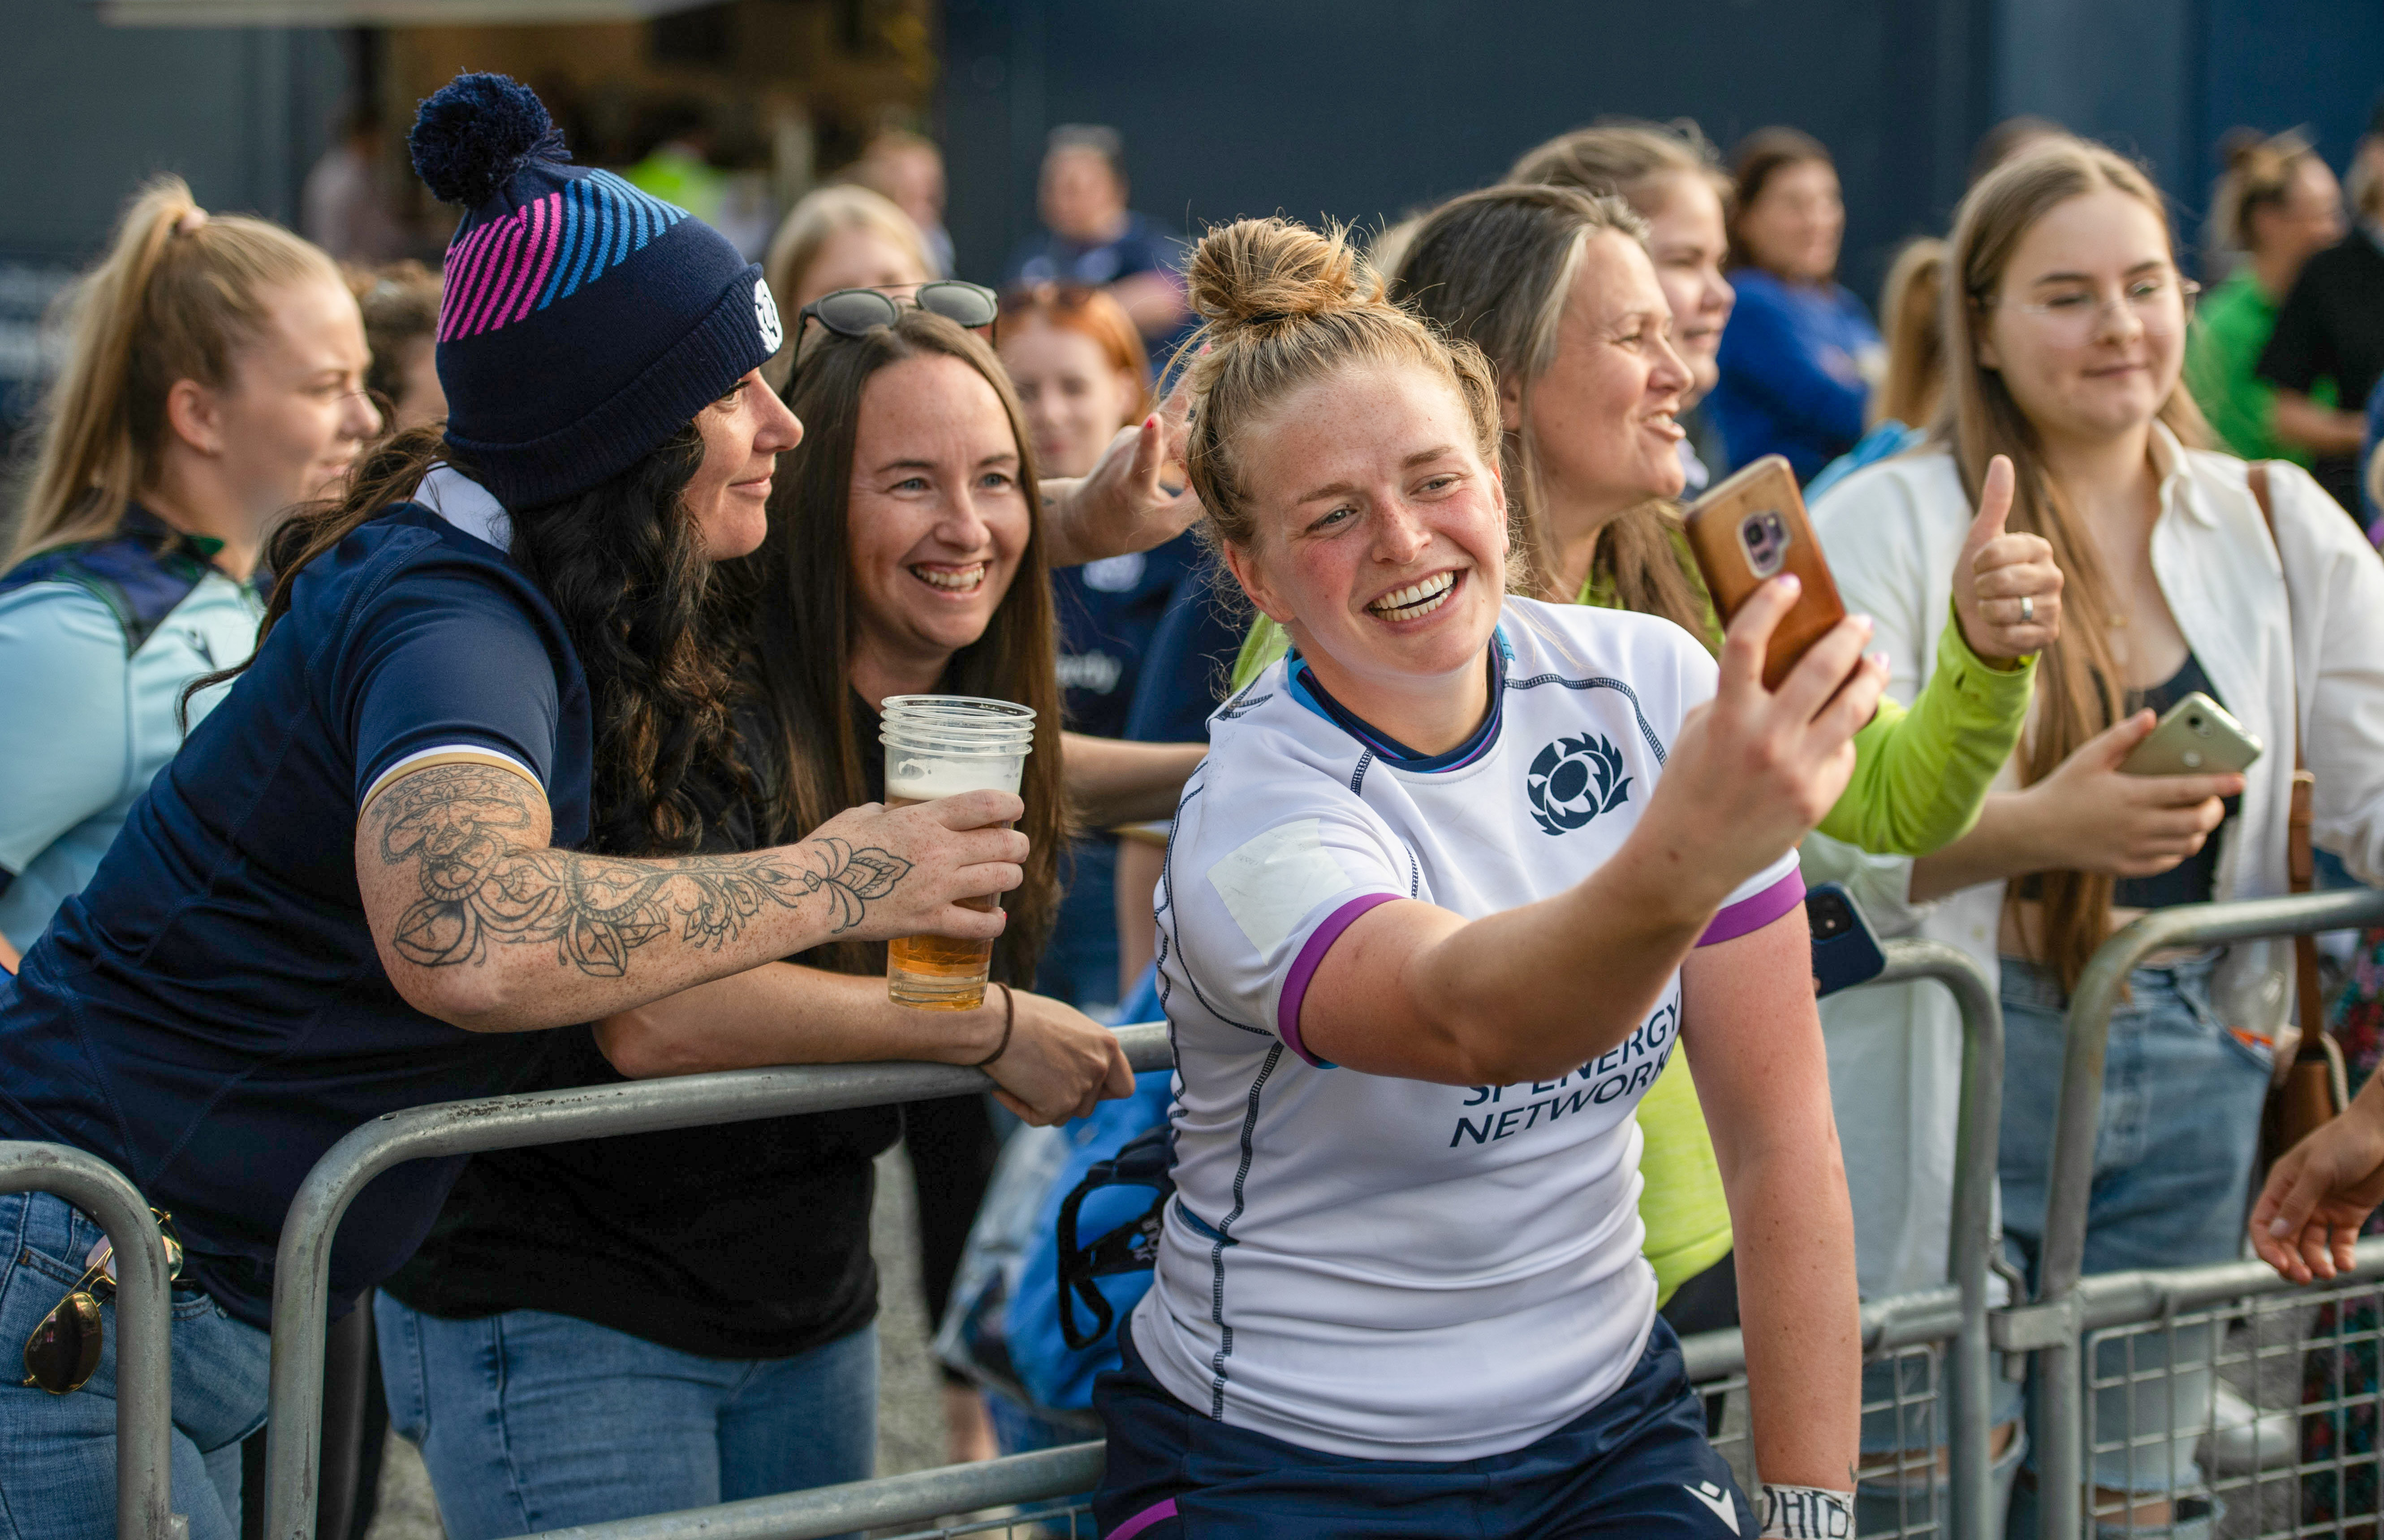 Image shows crowd behind metal gates as Rugby player takes a selfie with them.